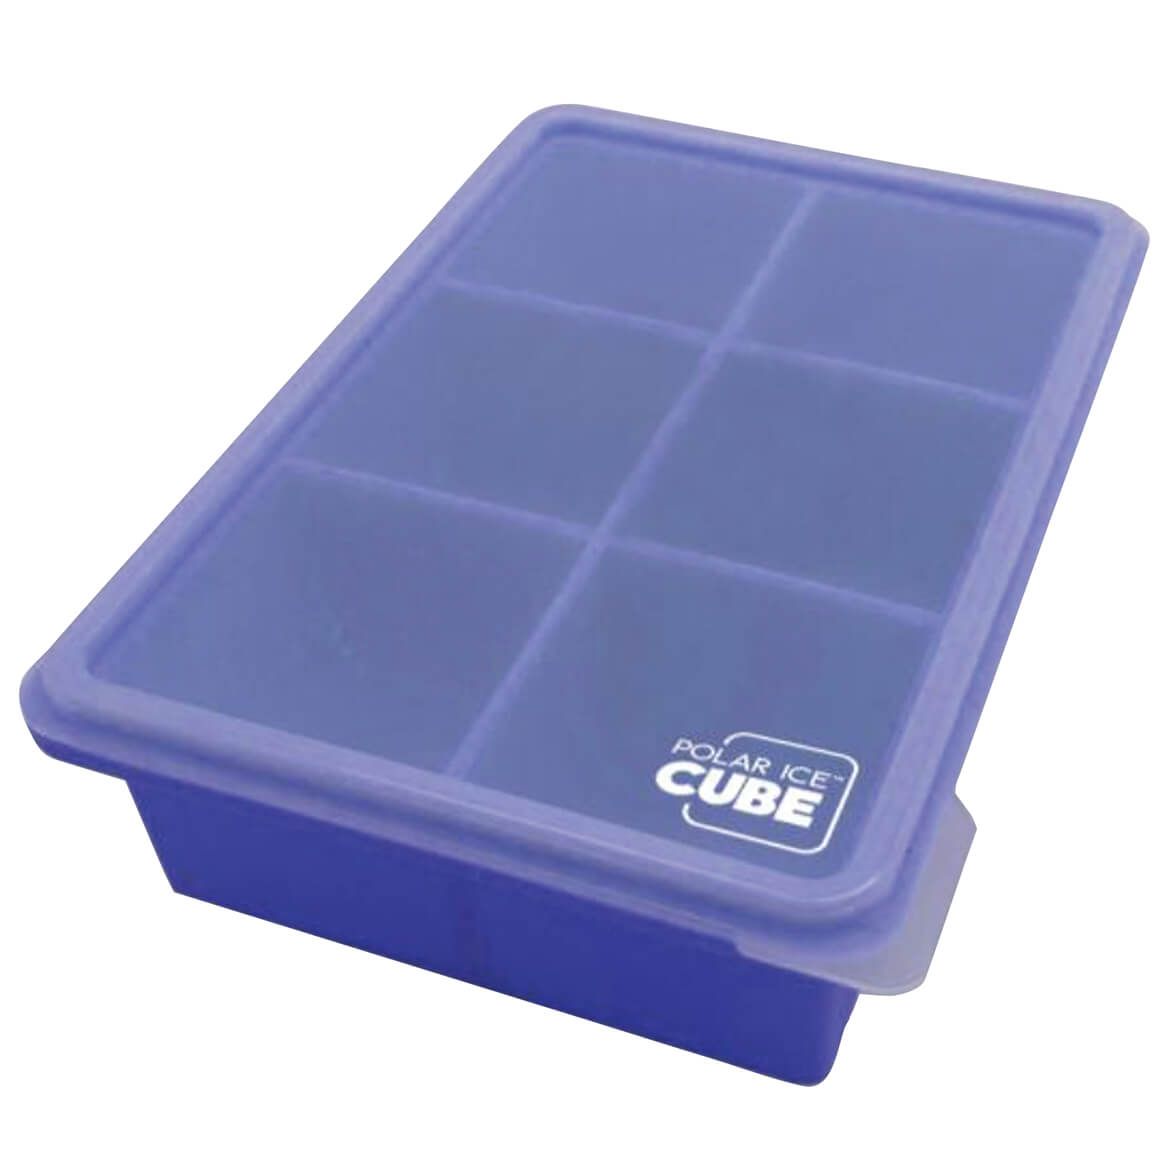 Easy-Release Ice Cube Tray, Large Cubes + '-' + 375683